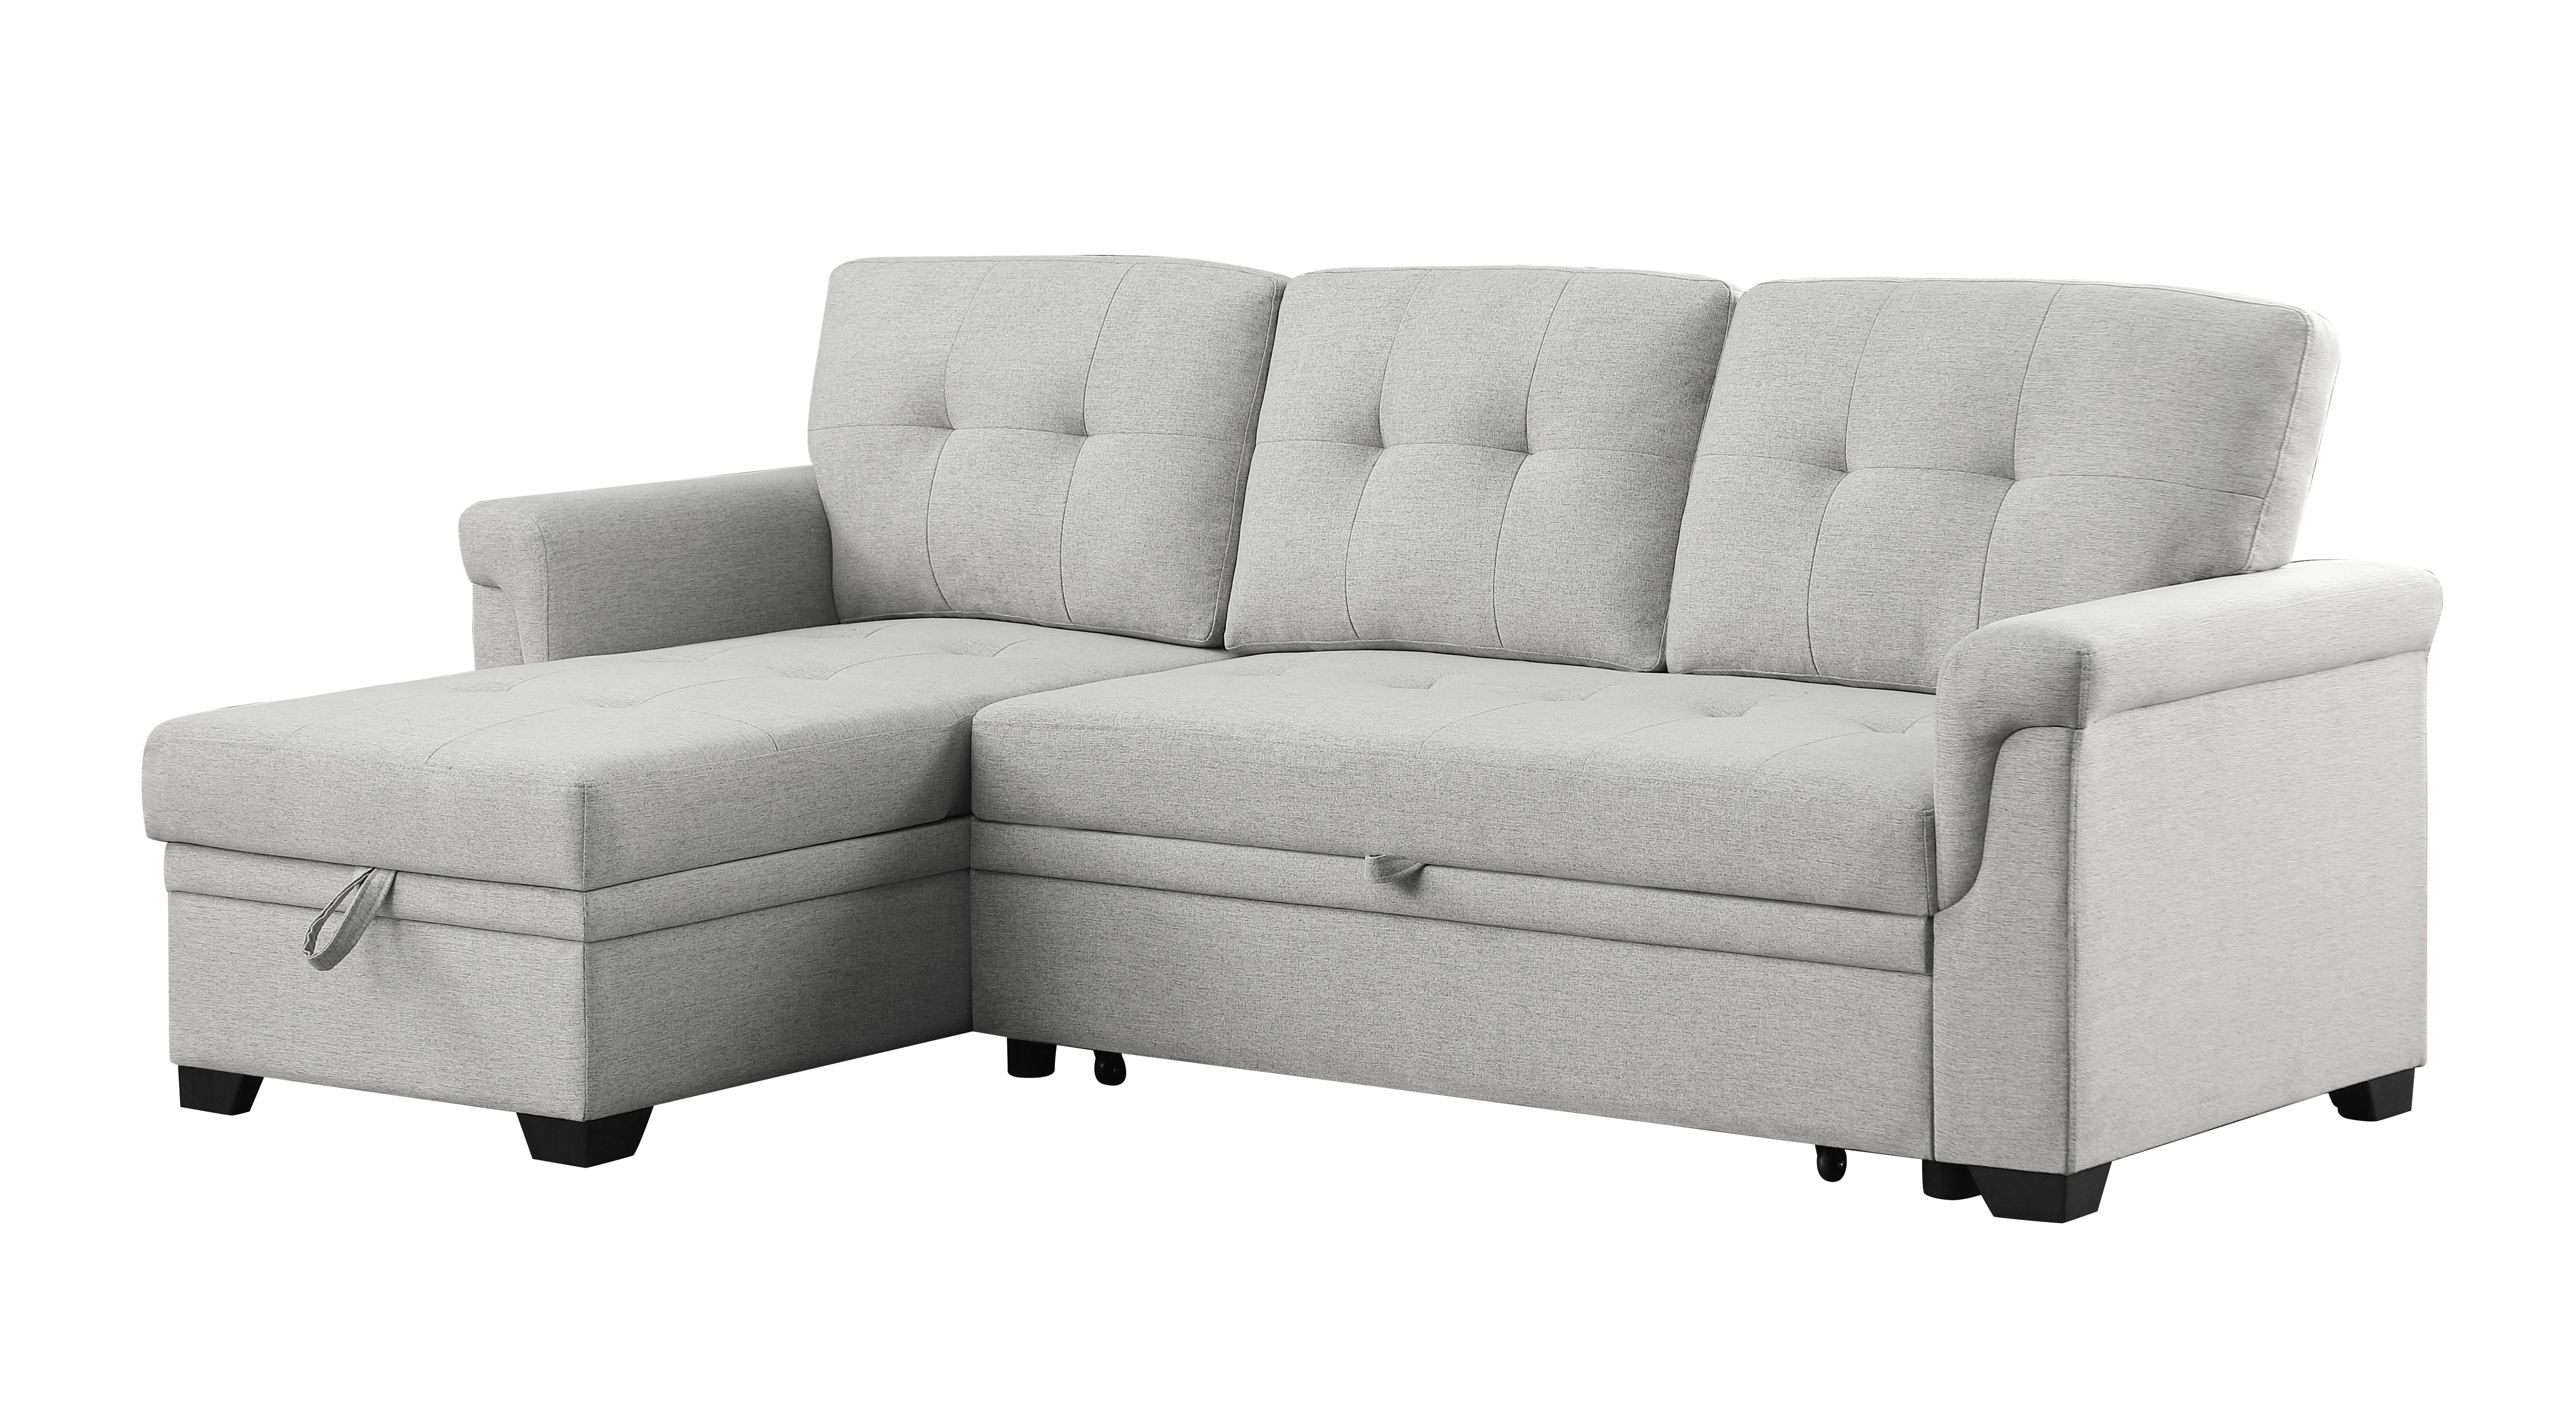 Sierra - Linen Reversible Sleeper Sectional Sofa With Storage Chaise